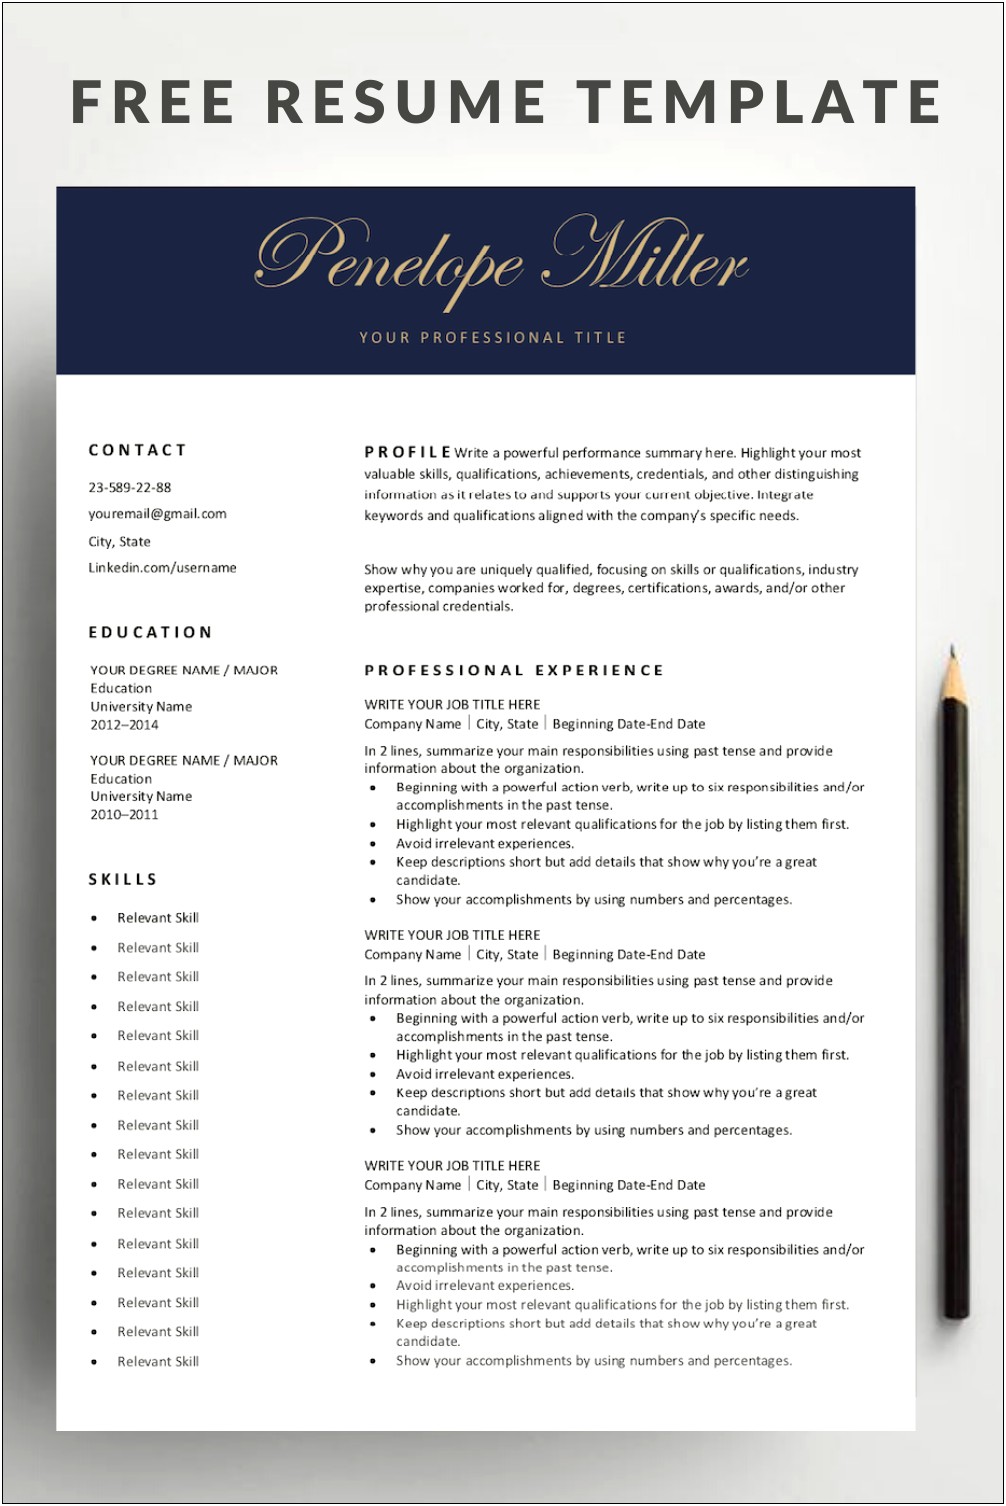 Free Resume Templates You Can Download